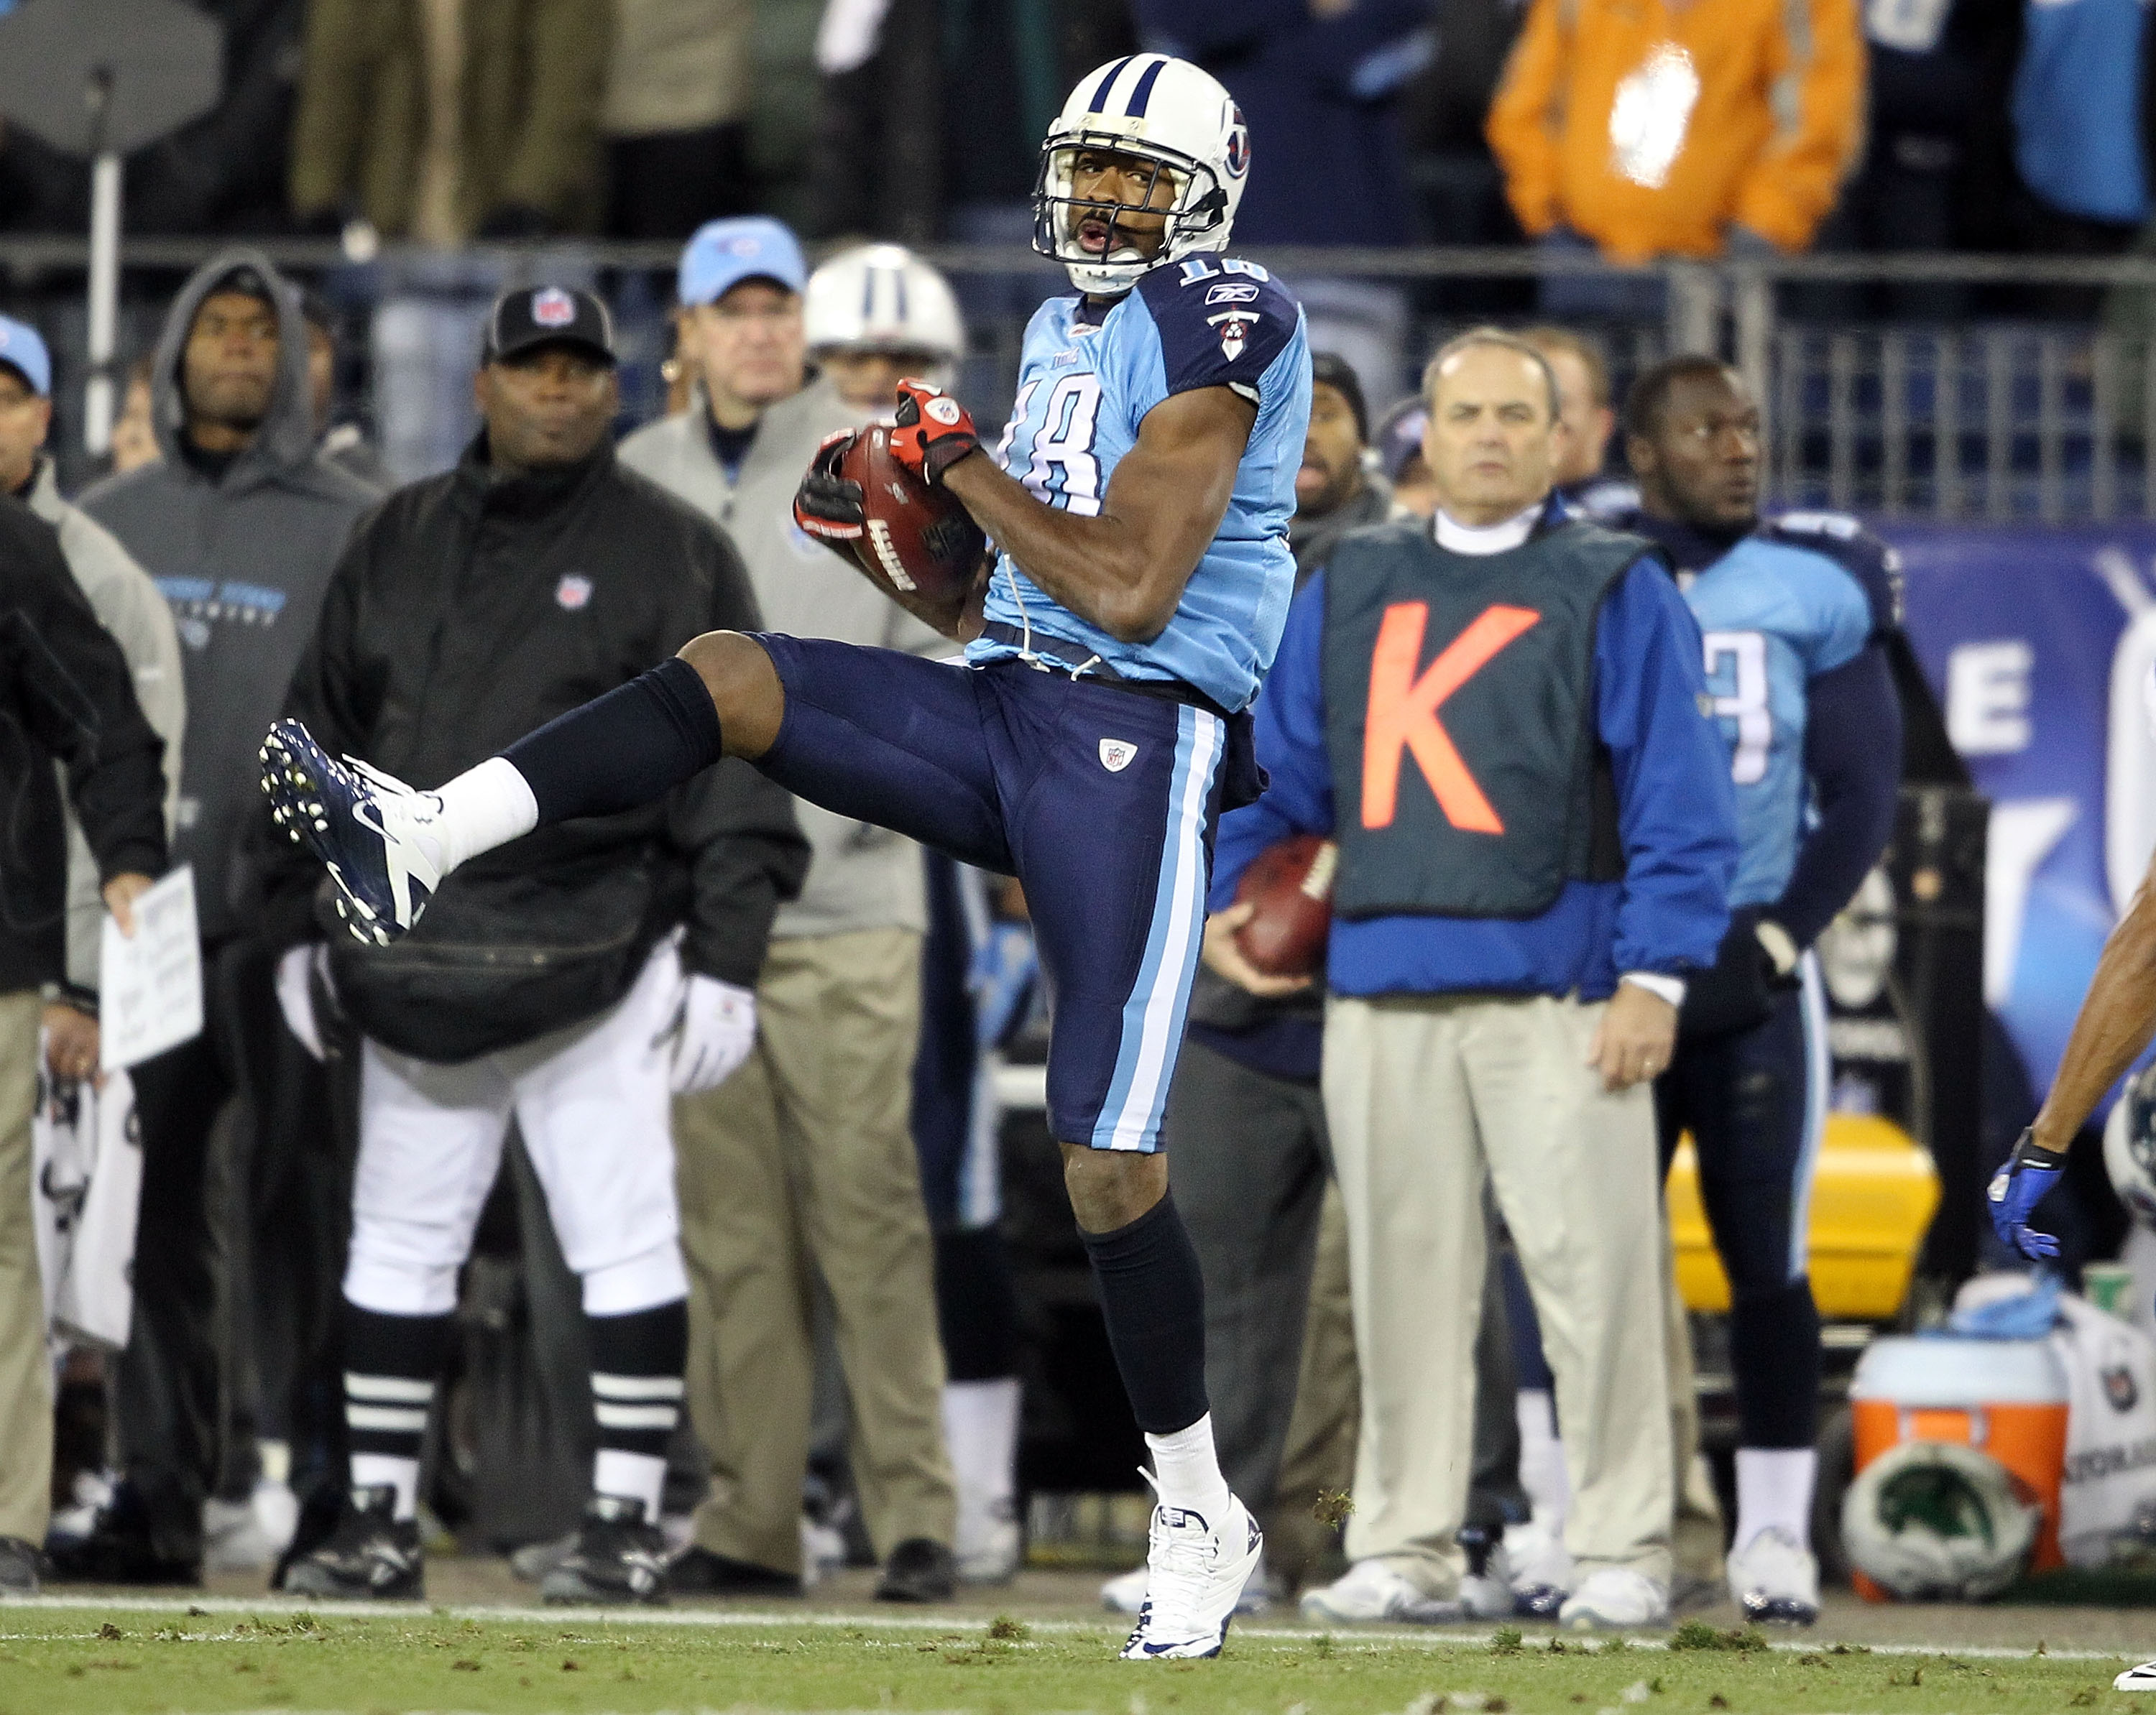 NASHVILLE, TN - DECEMBER 09:  Kenny Britt #18 of the Tennessee Titans catches a pass during the NFL game against the Indianapolis Colts at LP Field on December 9, 2010 in Nashville, Tennessee.  (Photo by Andy Lyons/Getty Images)